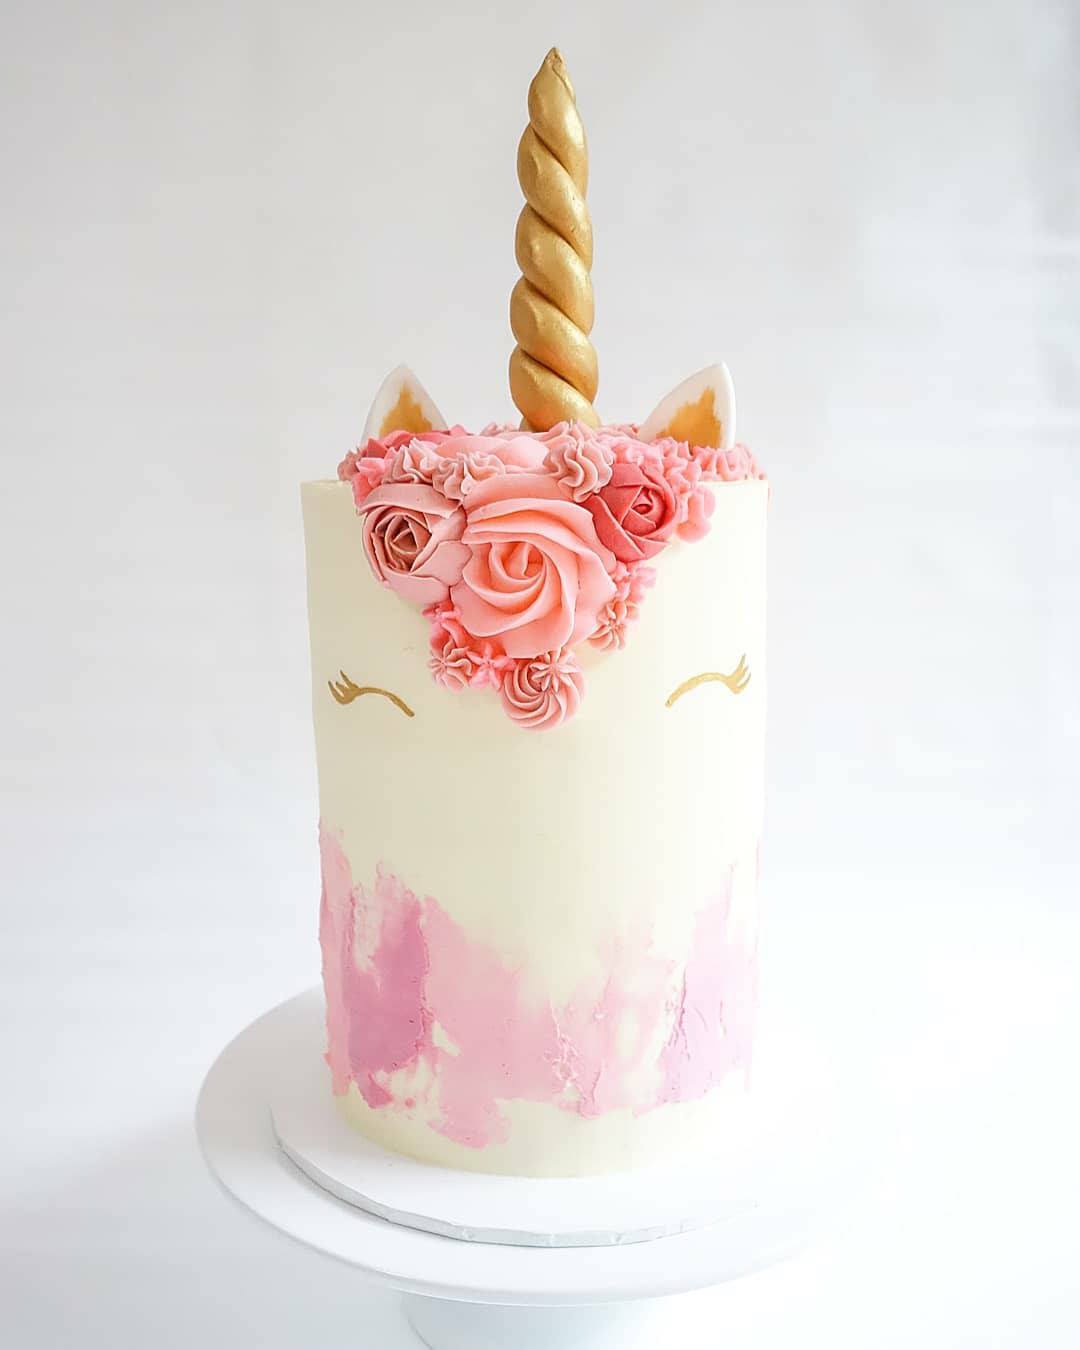 Modern Unicorn Cake in Adelaide by Brown Sugared Love.